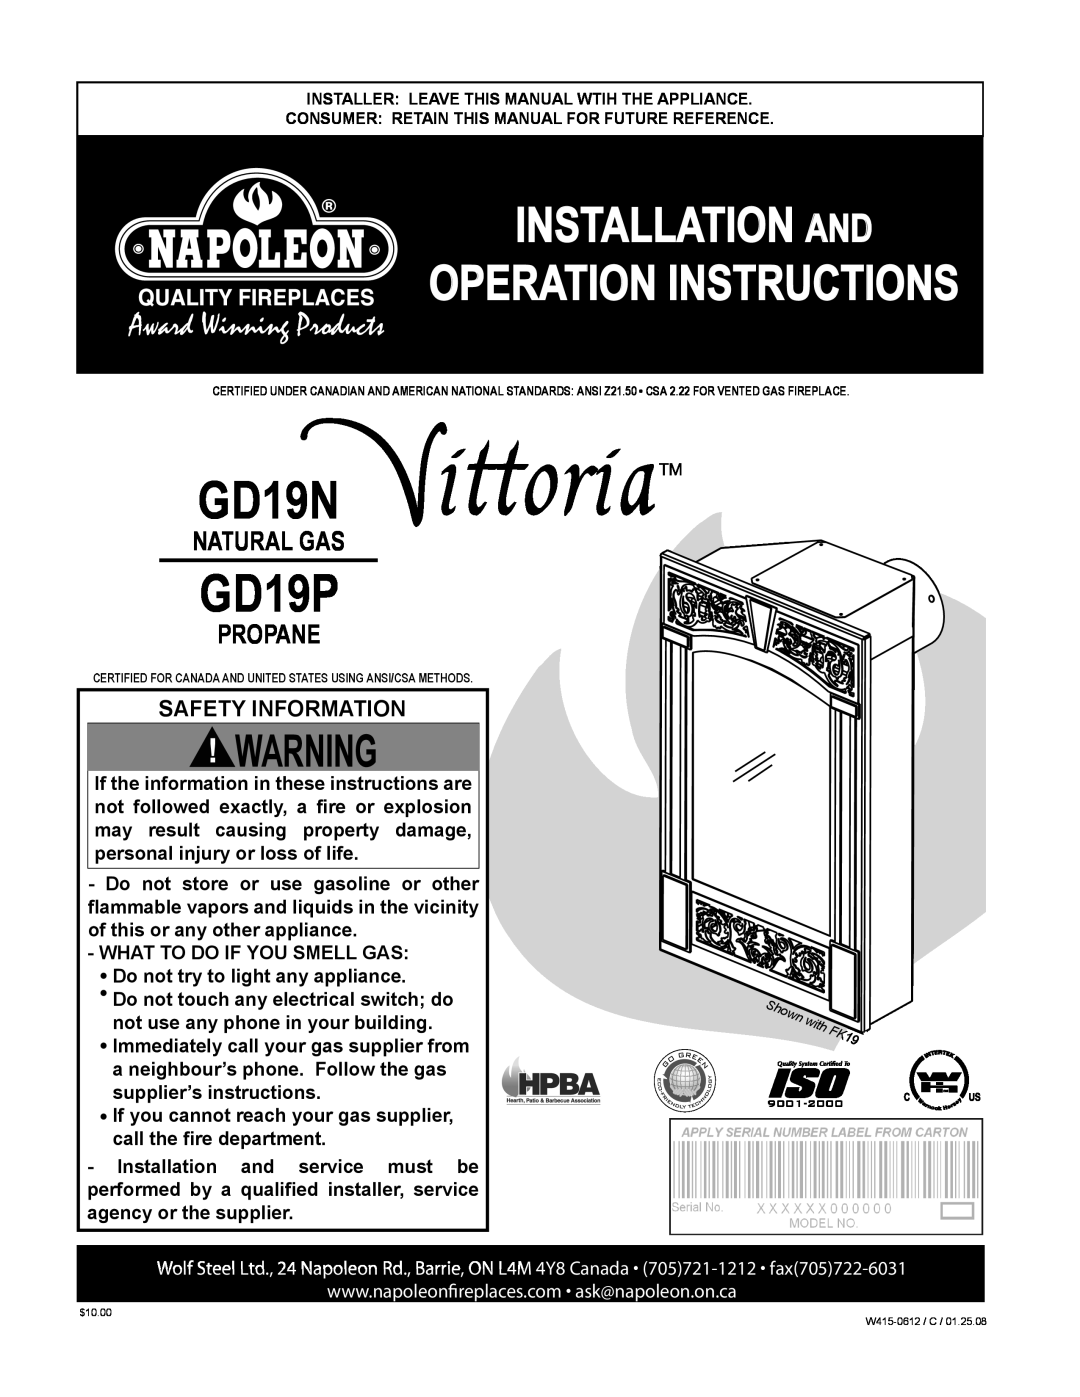 Napoleon Fireplaces GD19N manual GD19P, Installation And Operation Instructions, Natural Gas, Propane, Safety Information 